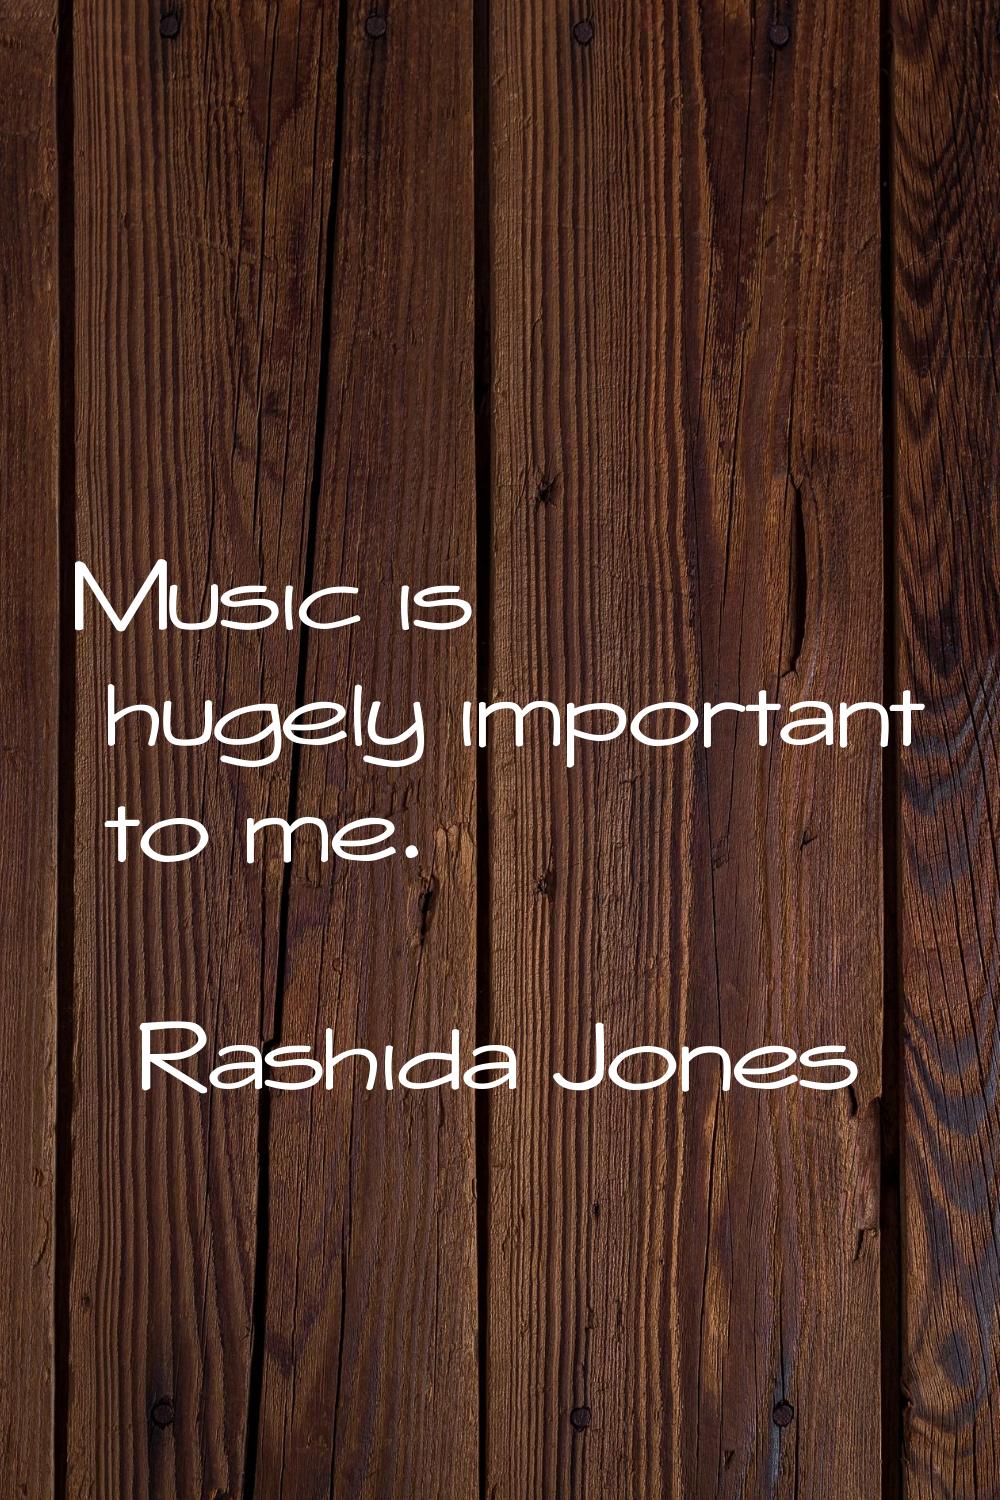 Music is hugely important to me.